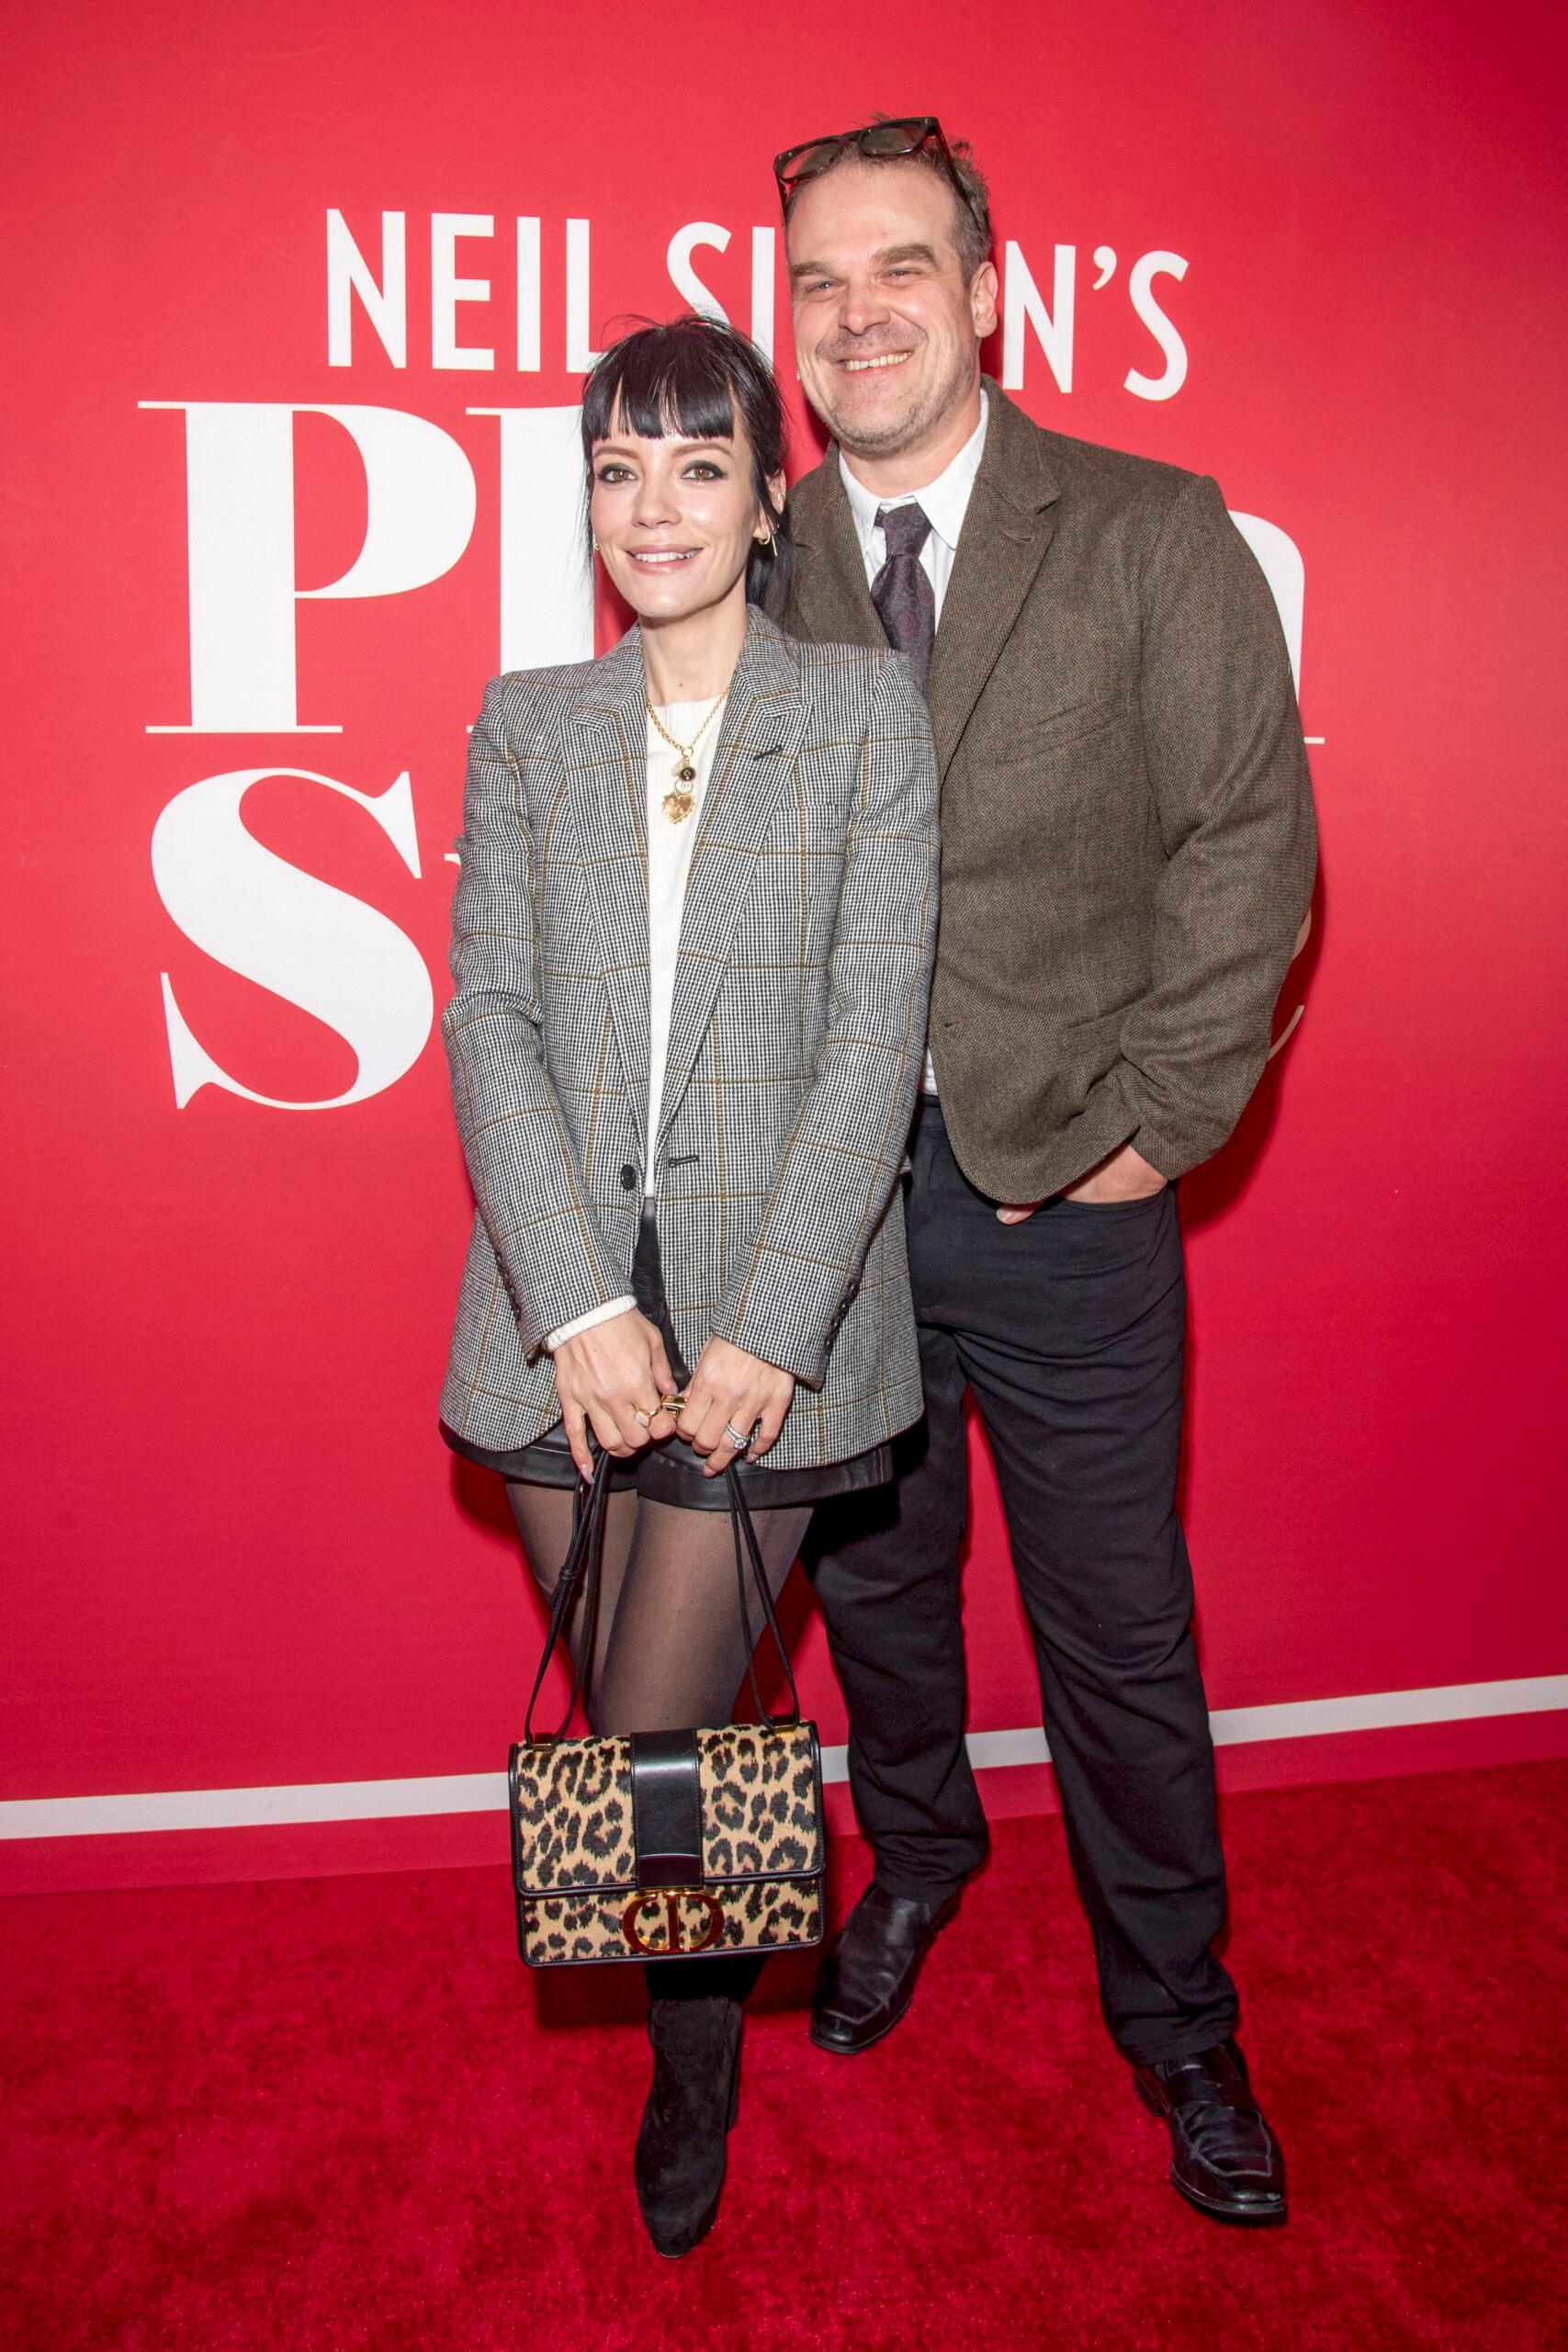 David Harbour's Marriage To Lily Allen Is 'So Great' Despite Split Speculations